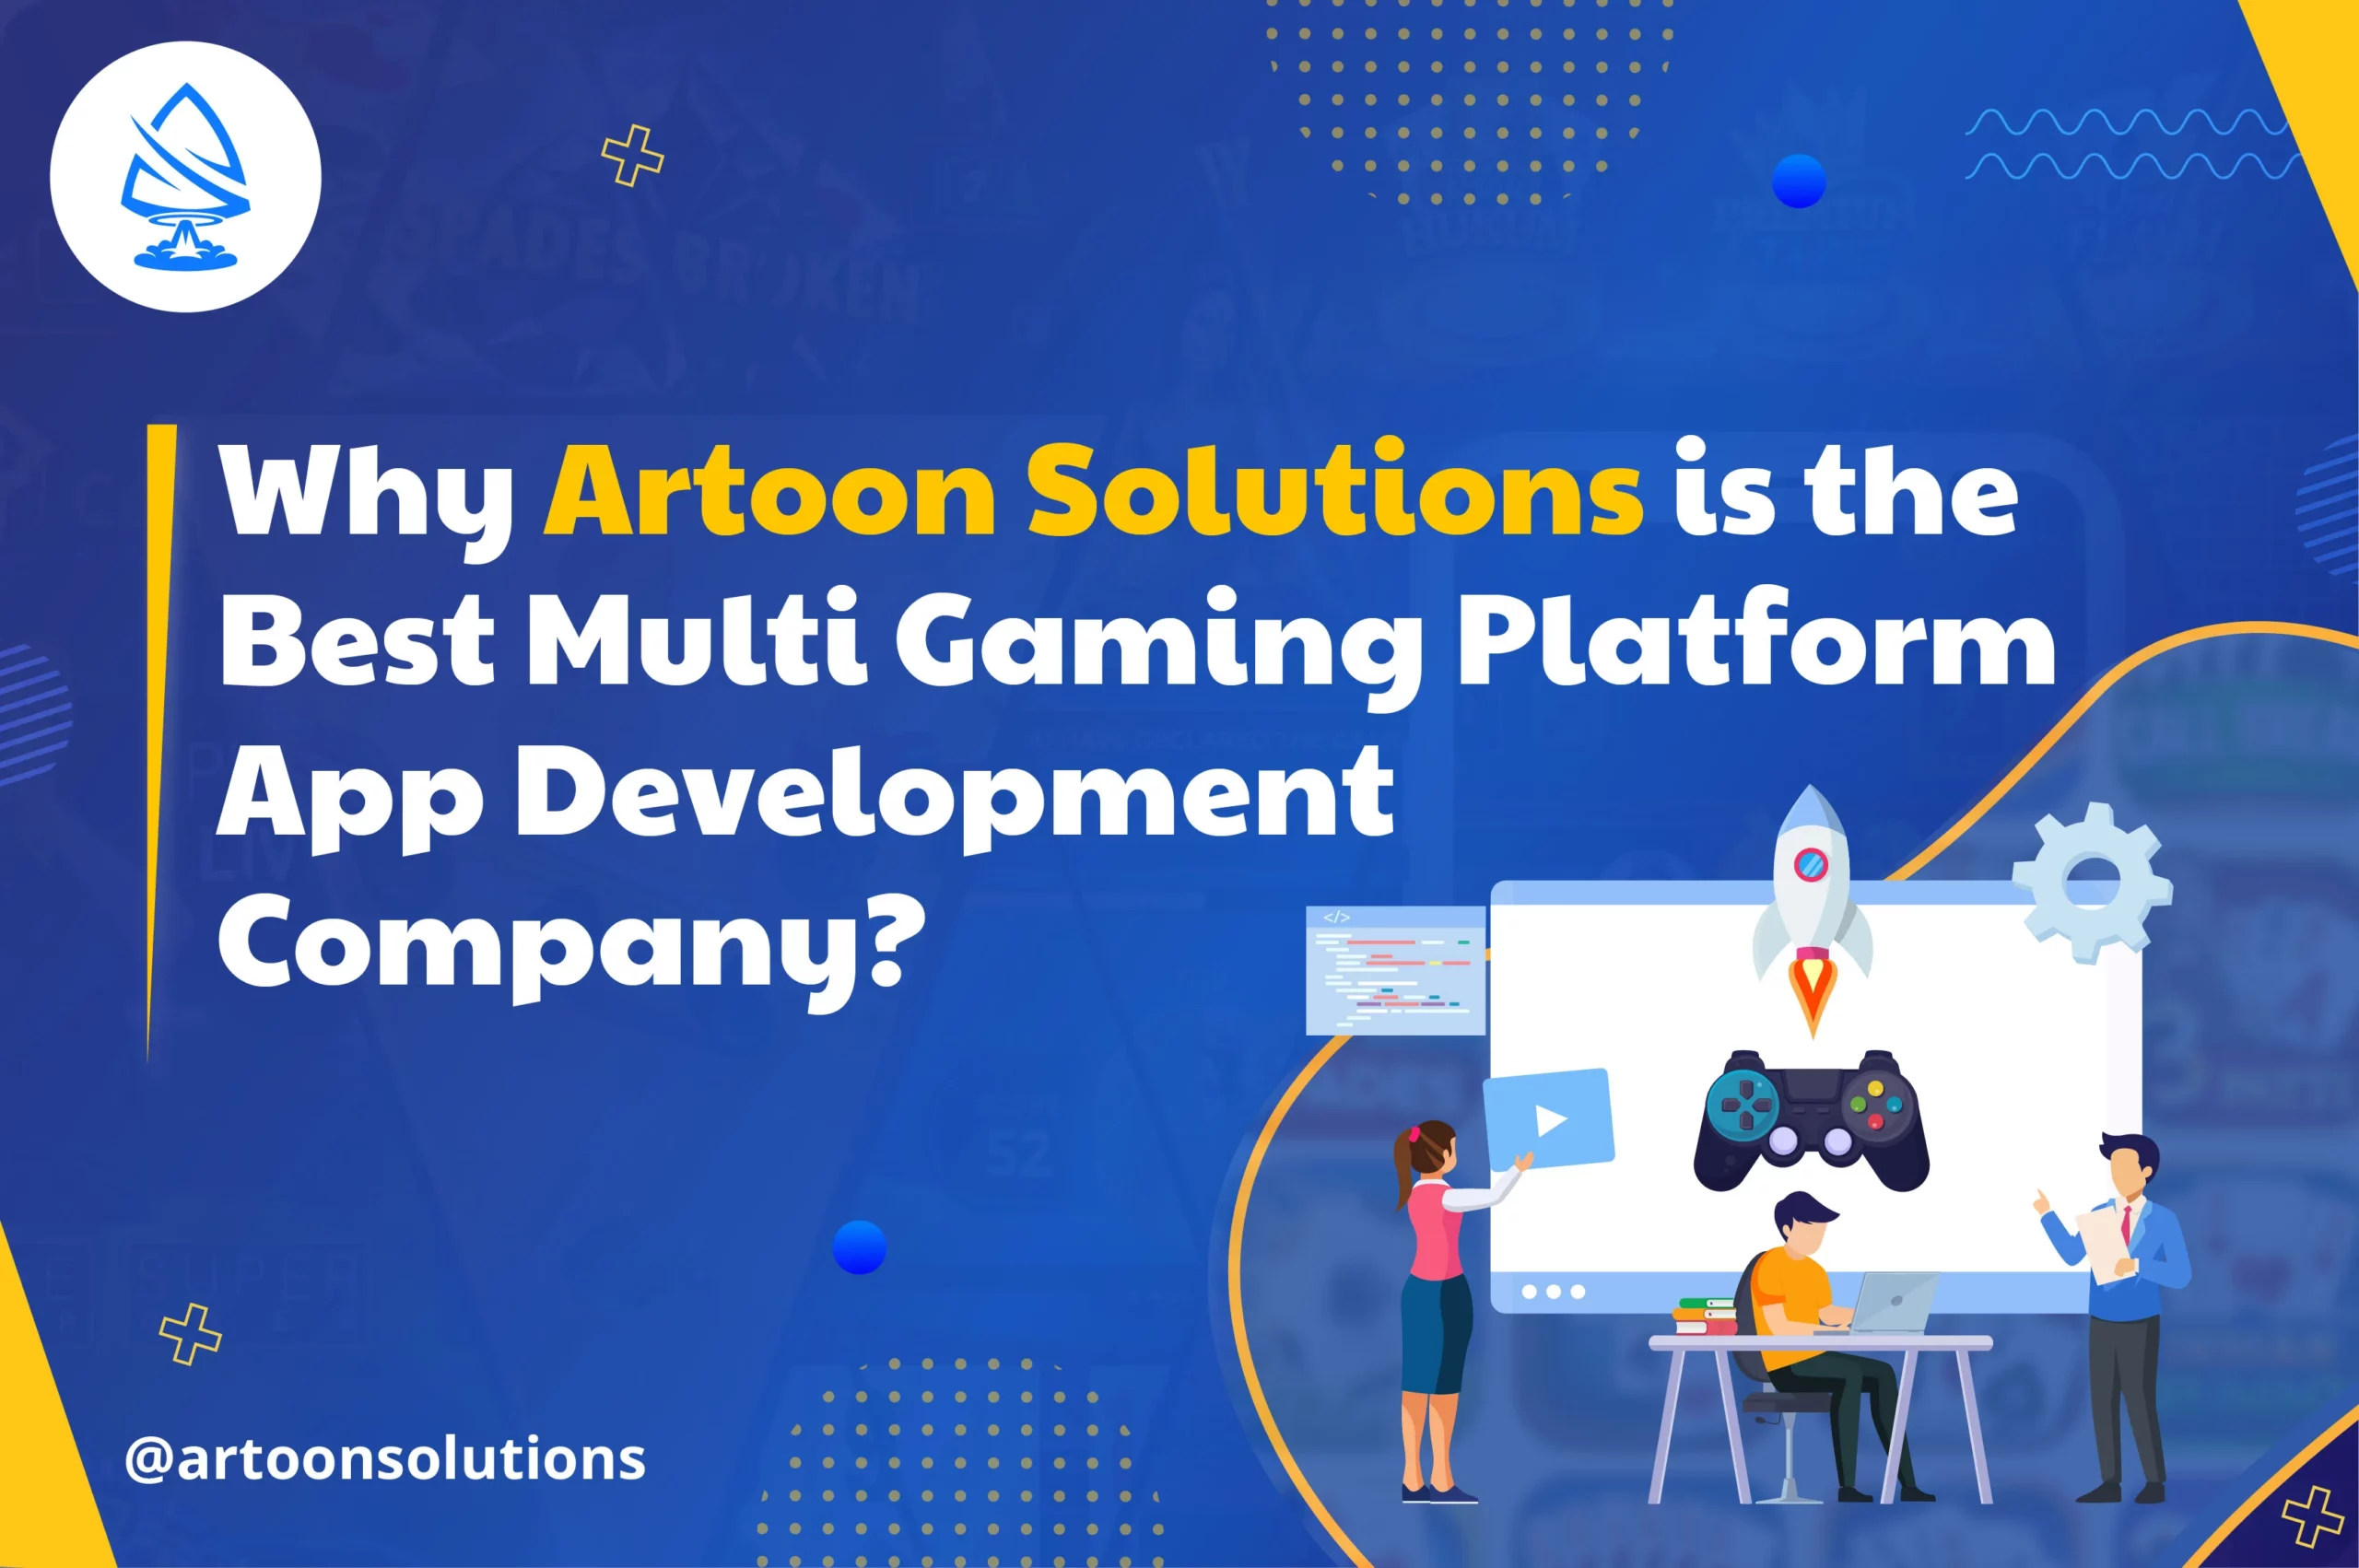 Why Artoon Solutions is the Best Multigaming Platform App Development Company